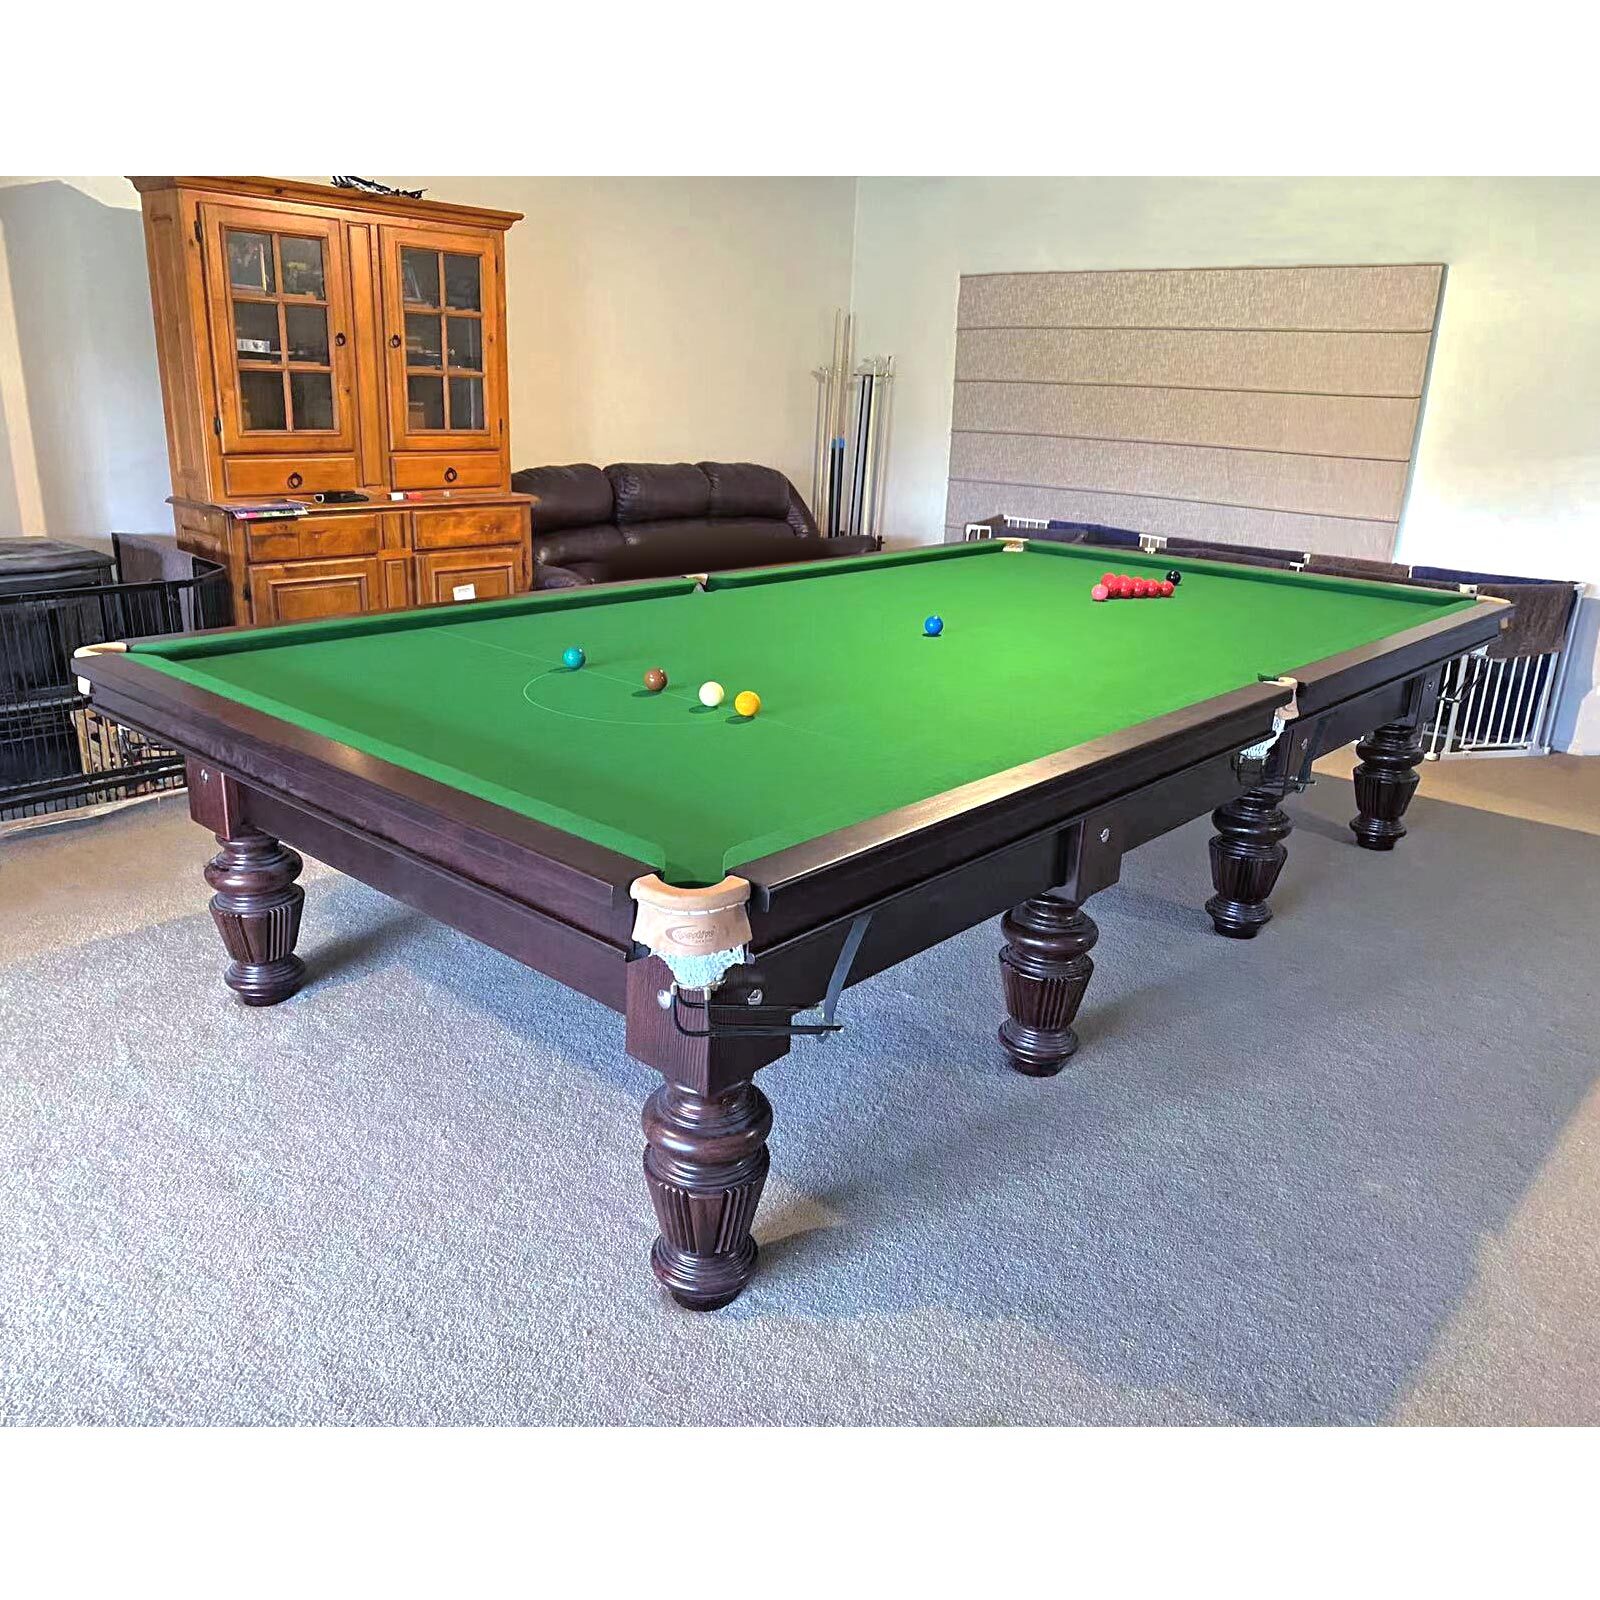 12 Foot Slate Windsor Snooker Table - Timber cushion